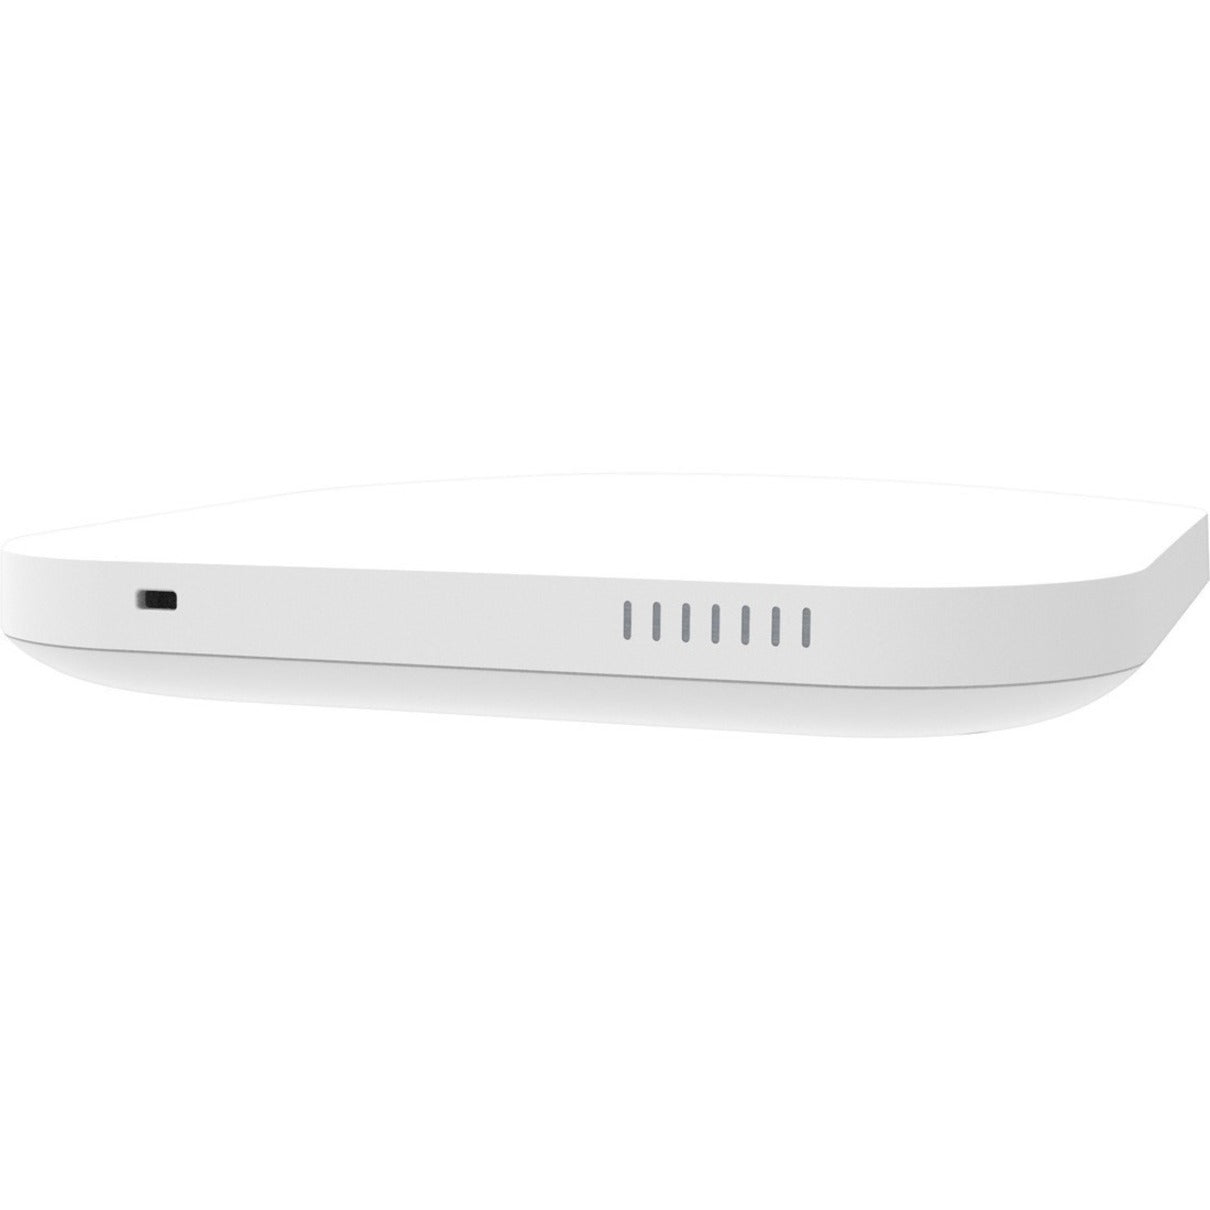 SonicWall 03-SSC-0305 SonicWave 641 Wireless Access Point 8-Pack, Secure Wireless Network Management and Support 3YR